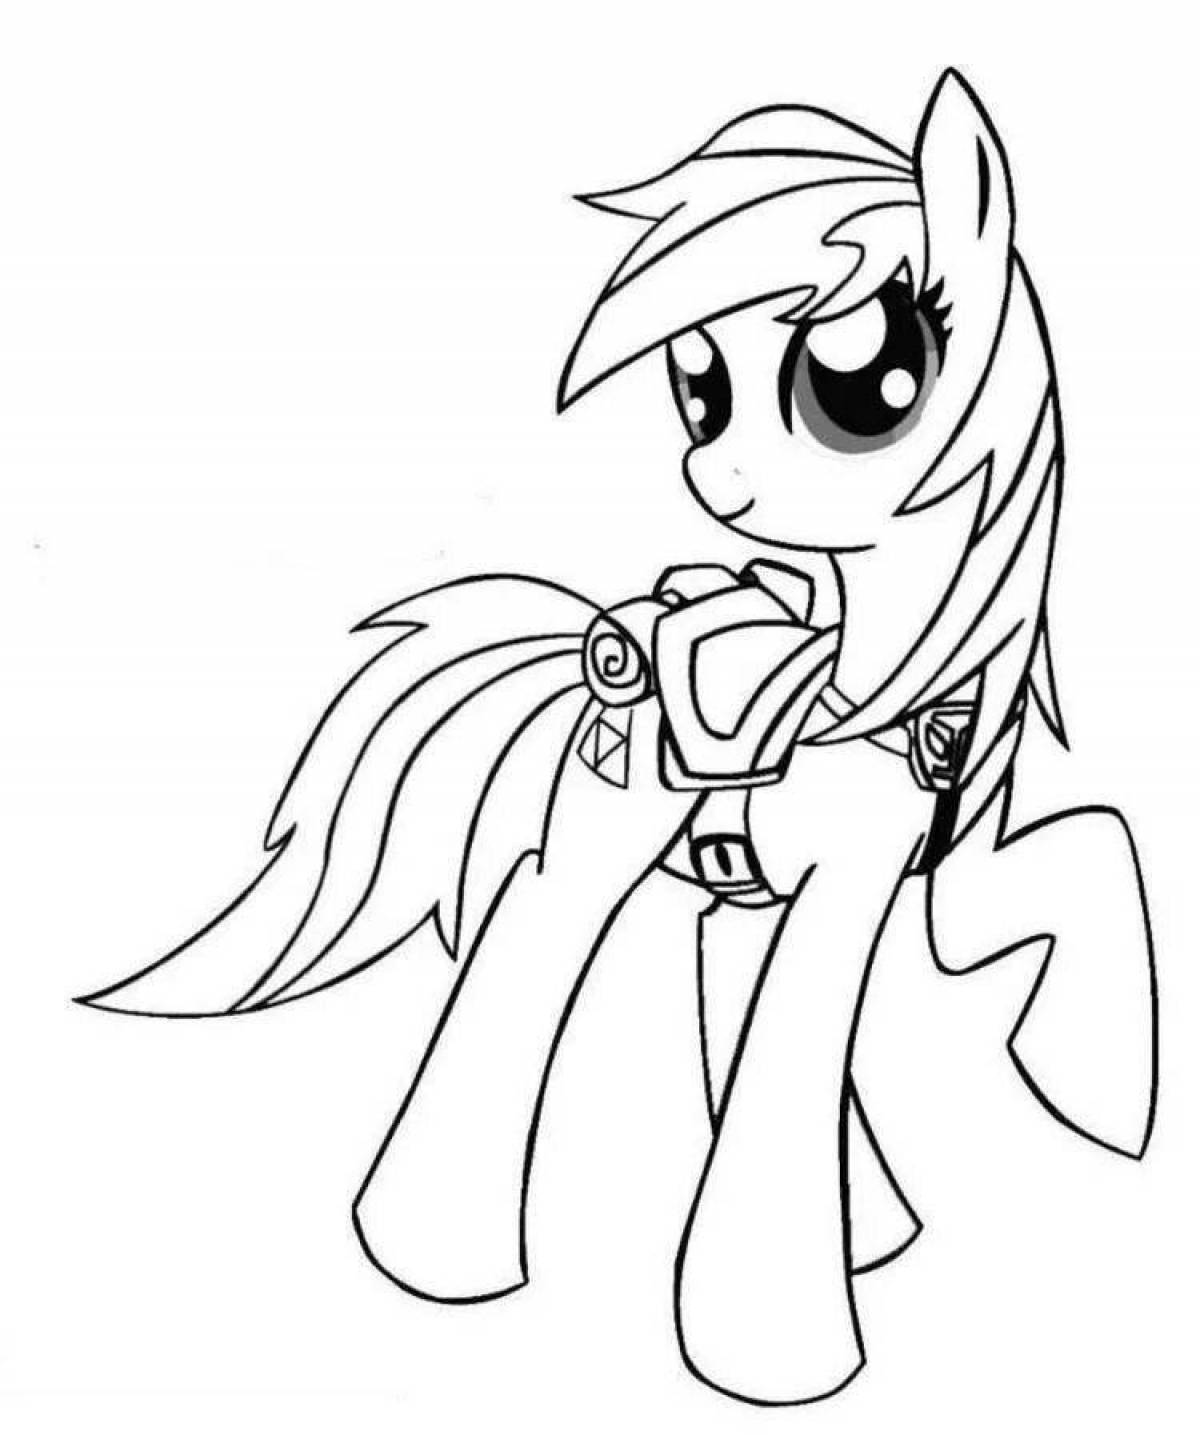 Sunny glowing pony coloring page